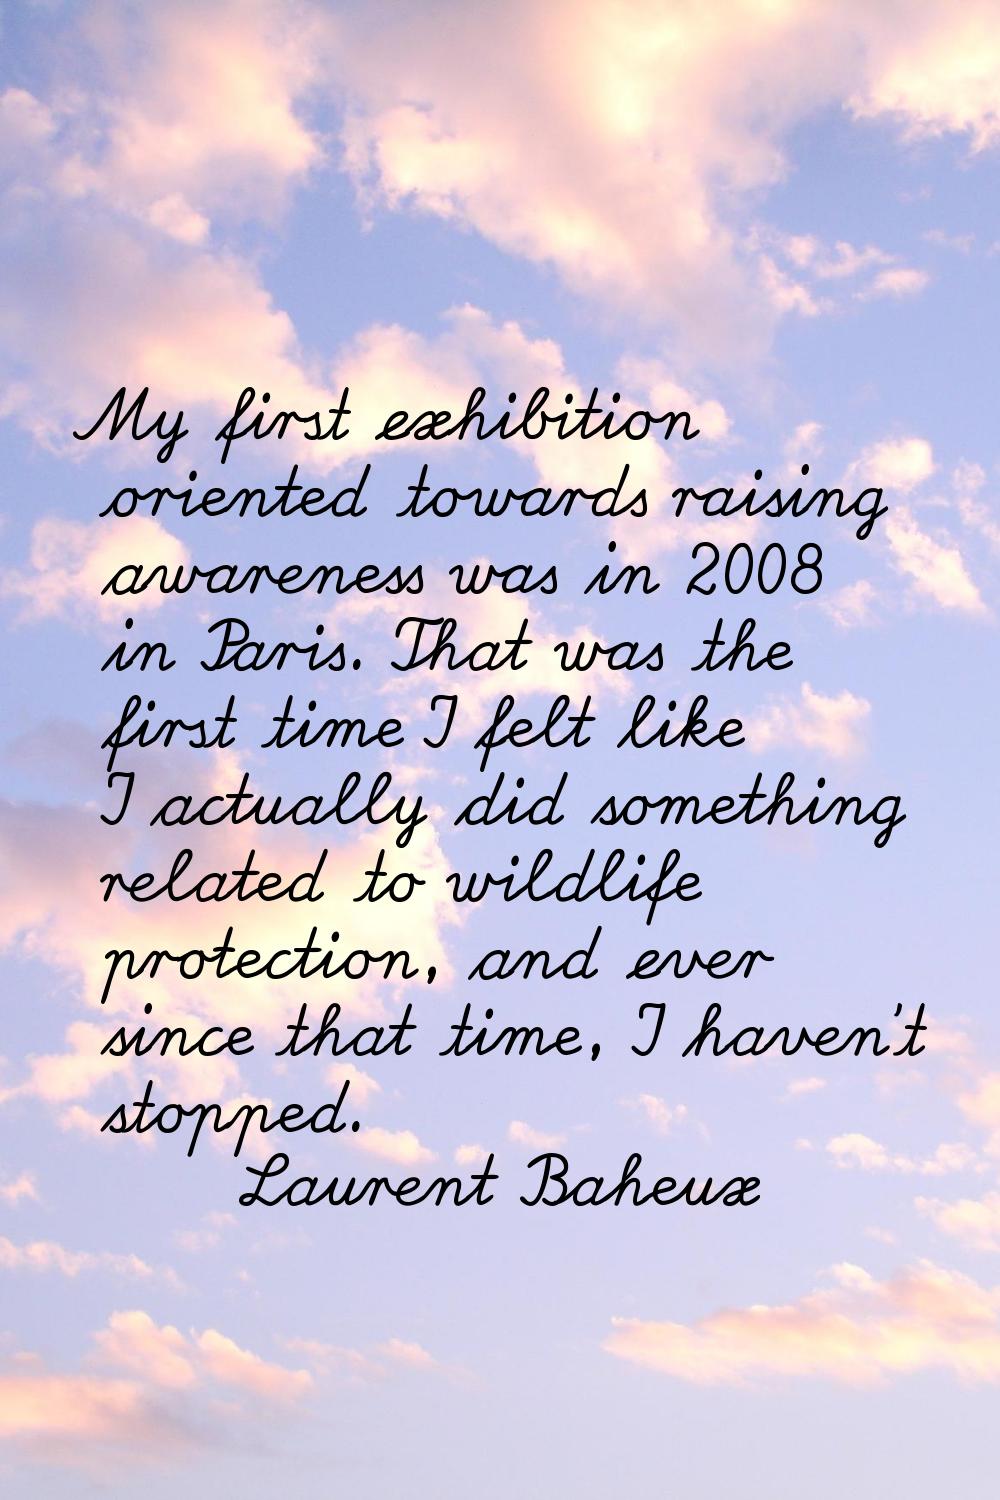 My first exhibition oriented towards raising awareness was in 2008 in Paris. That was the first tim